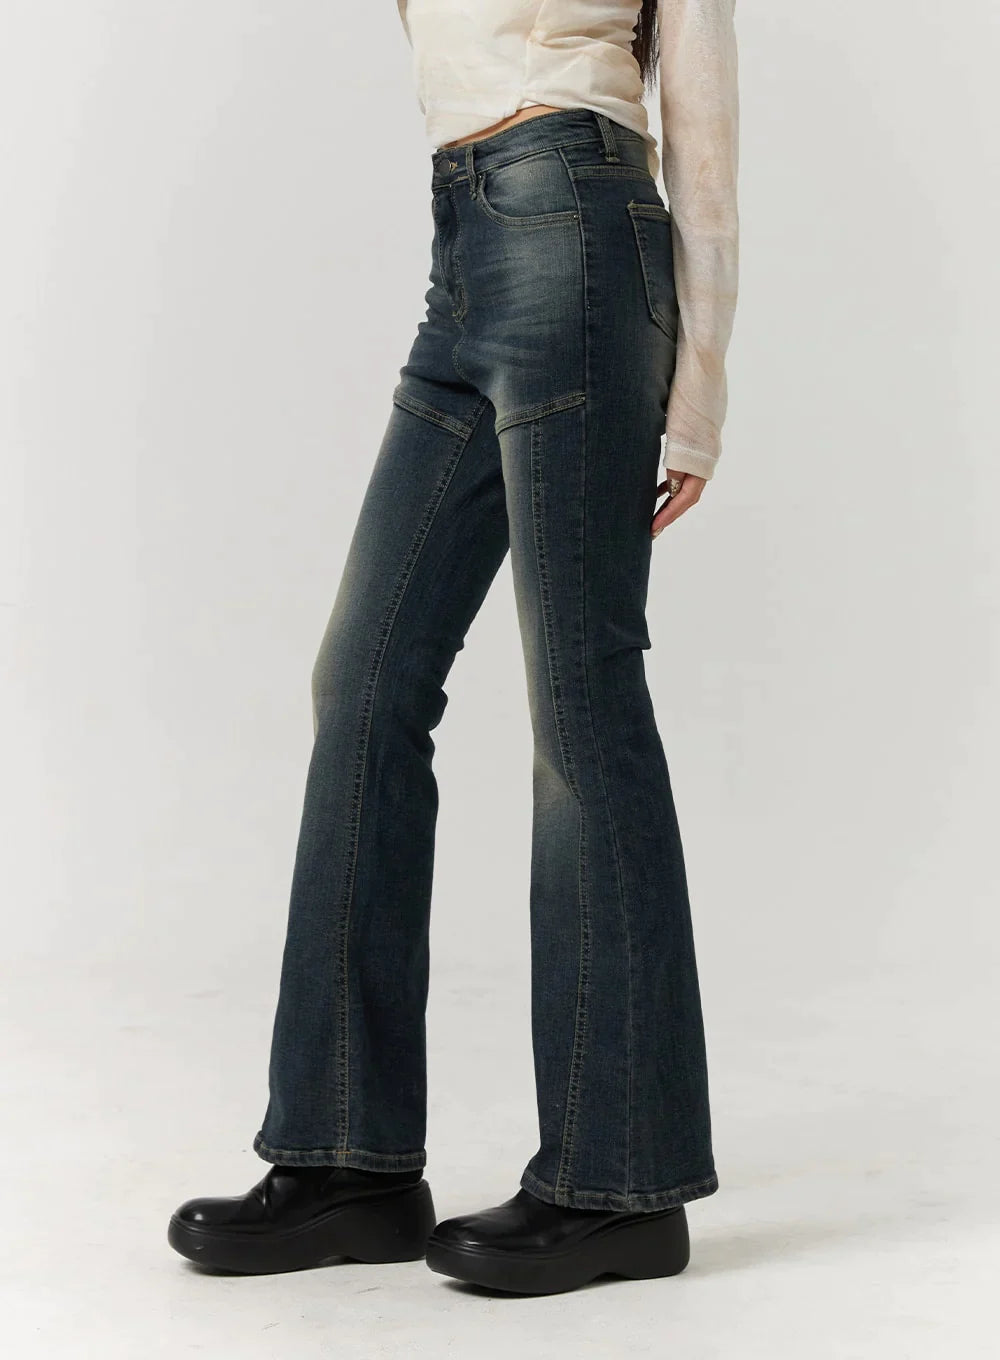 Women's Baggy Jeans: Embrace Comfort & Style with Trendy Denim Selections